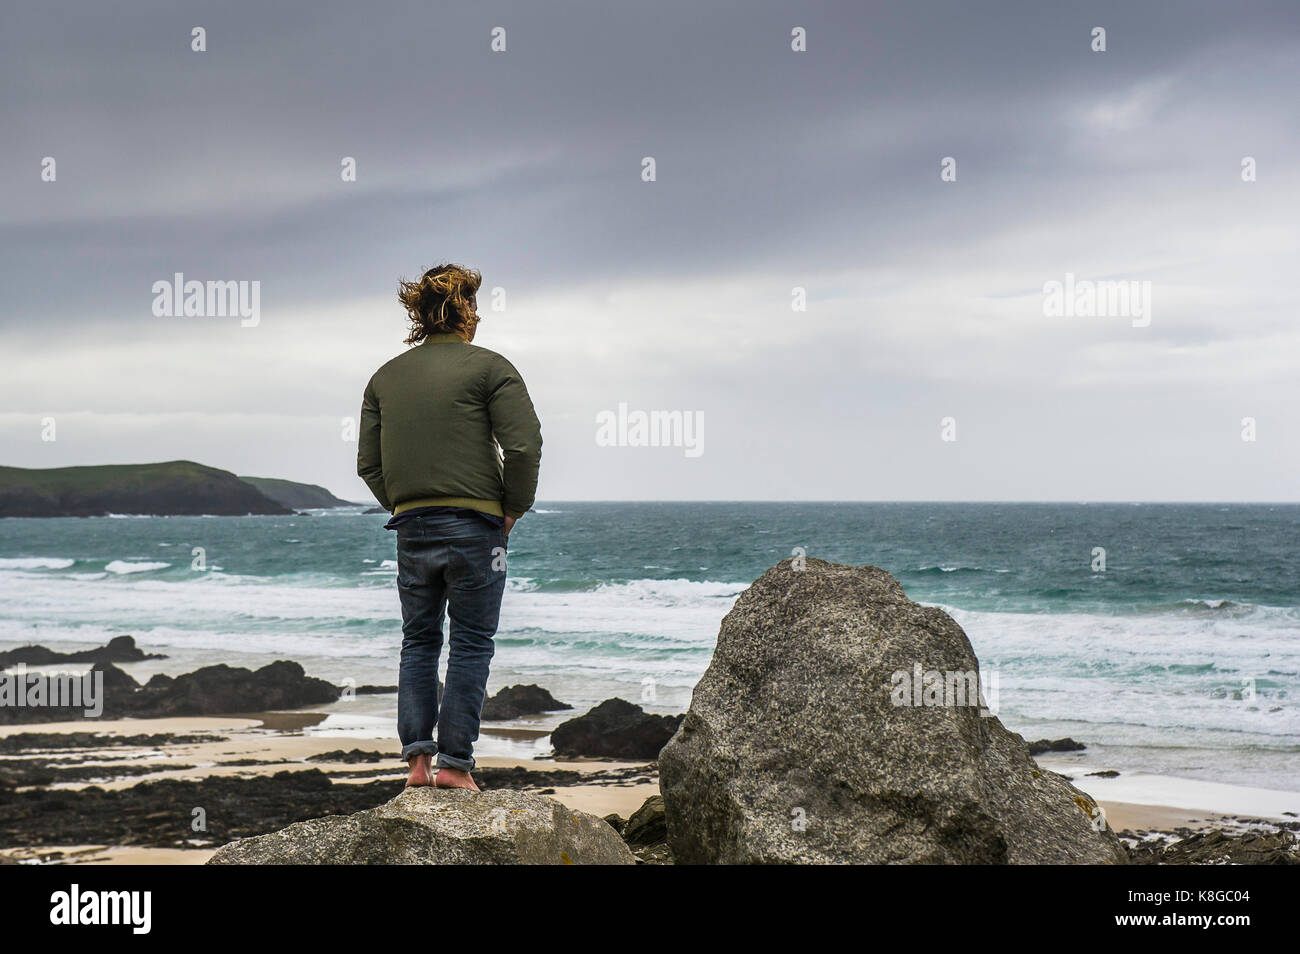 Newquay Cornwall - a barefoot man standing on a rock overlooking Little Fistral in Newquay, Cornwall. Stock Photo